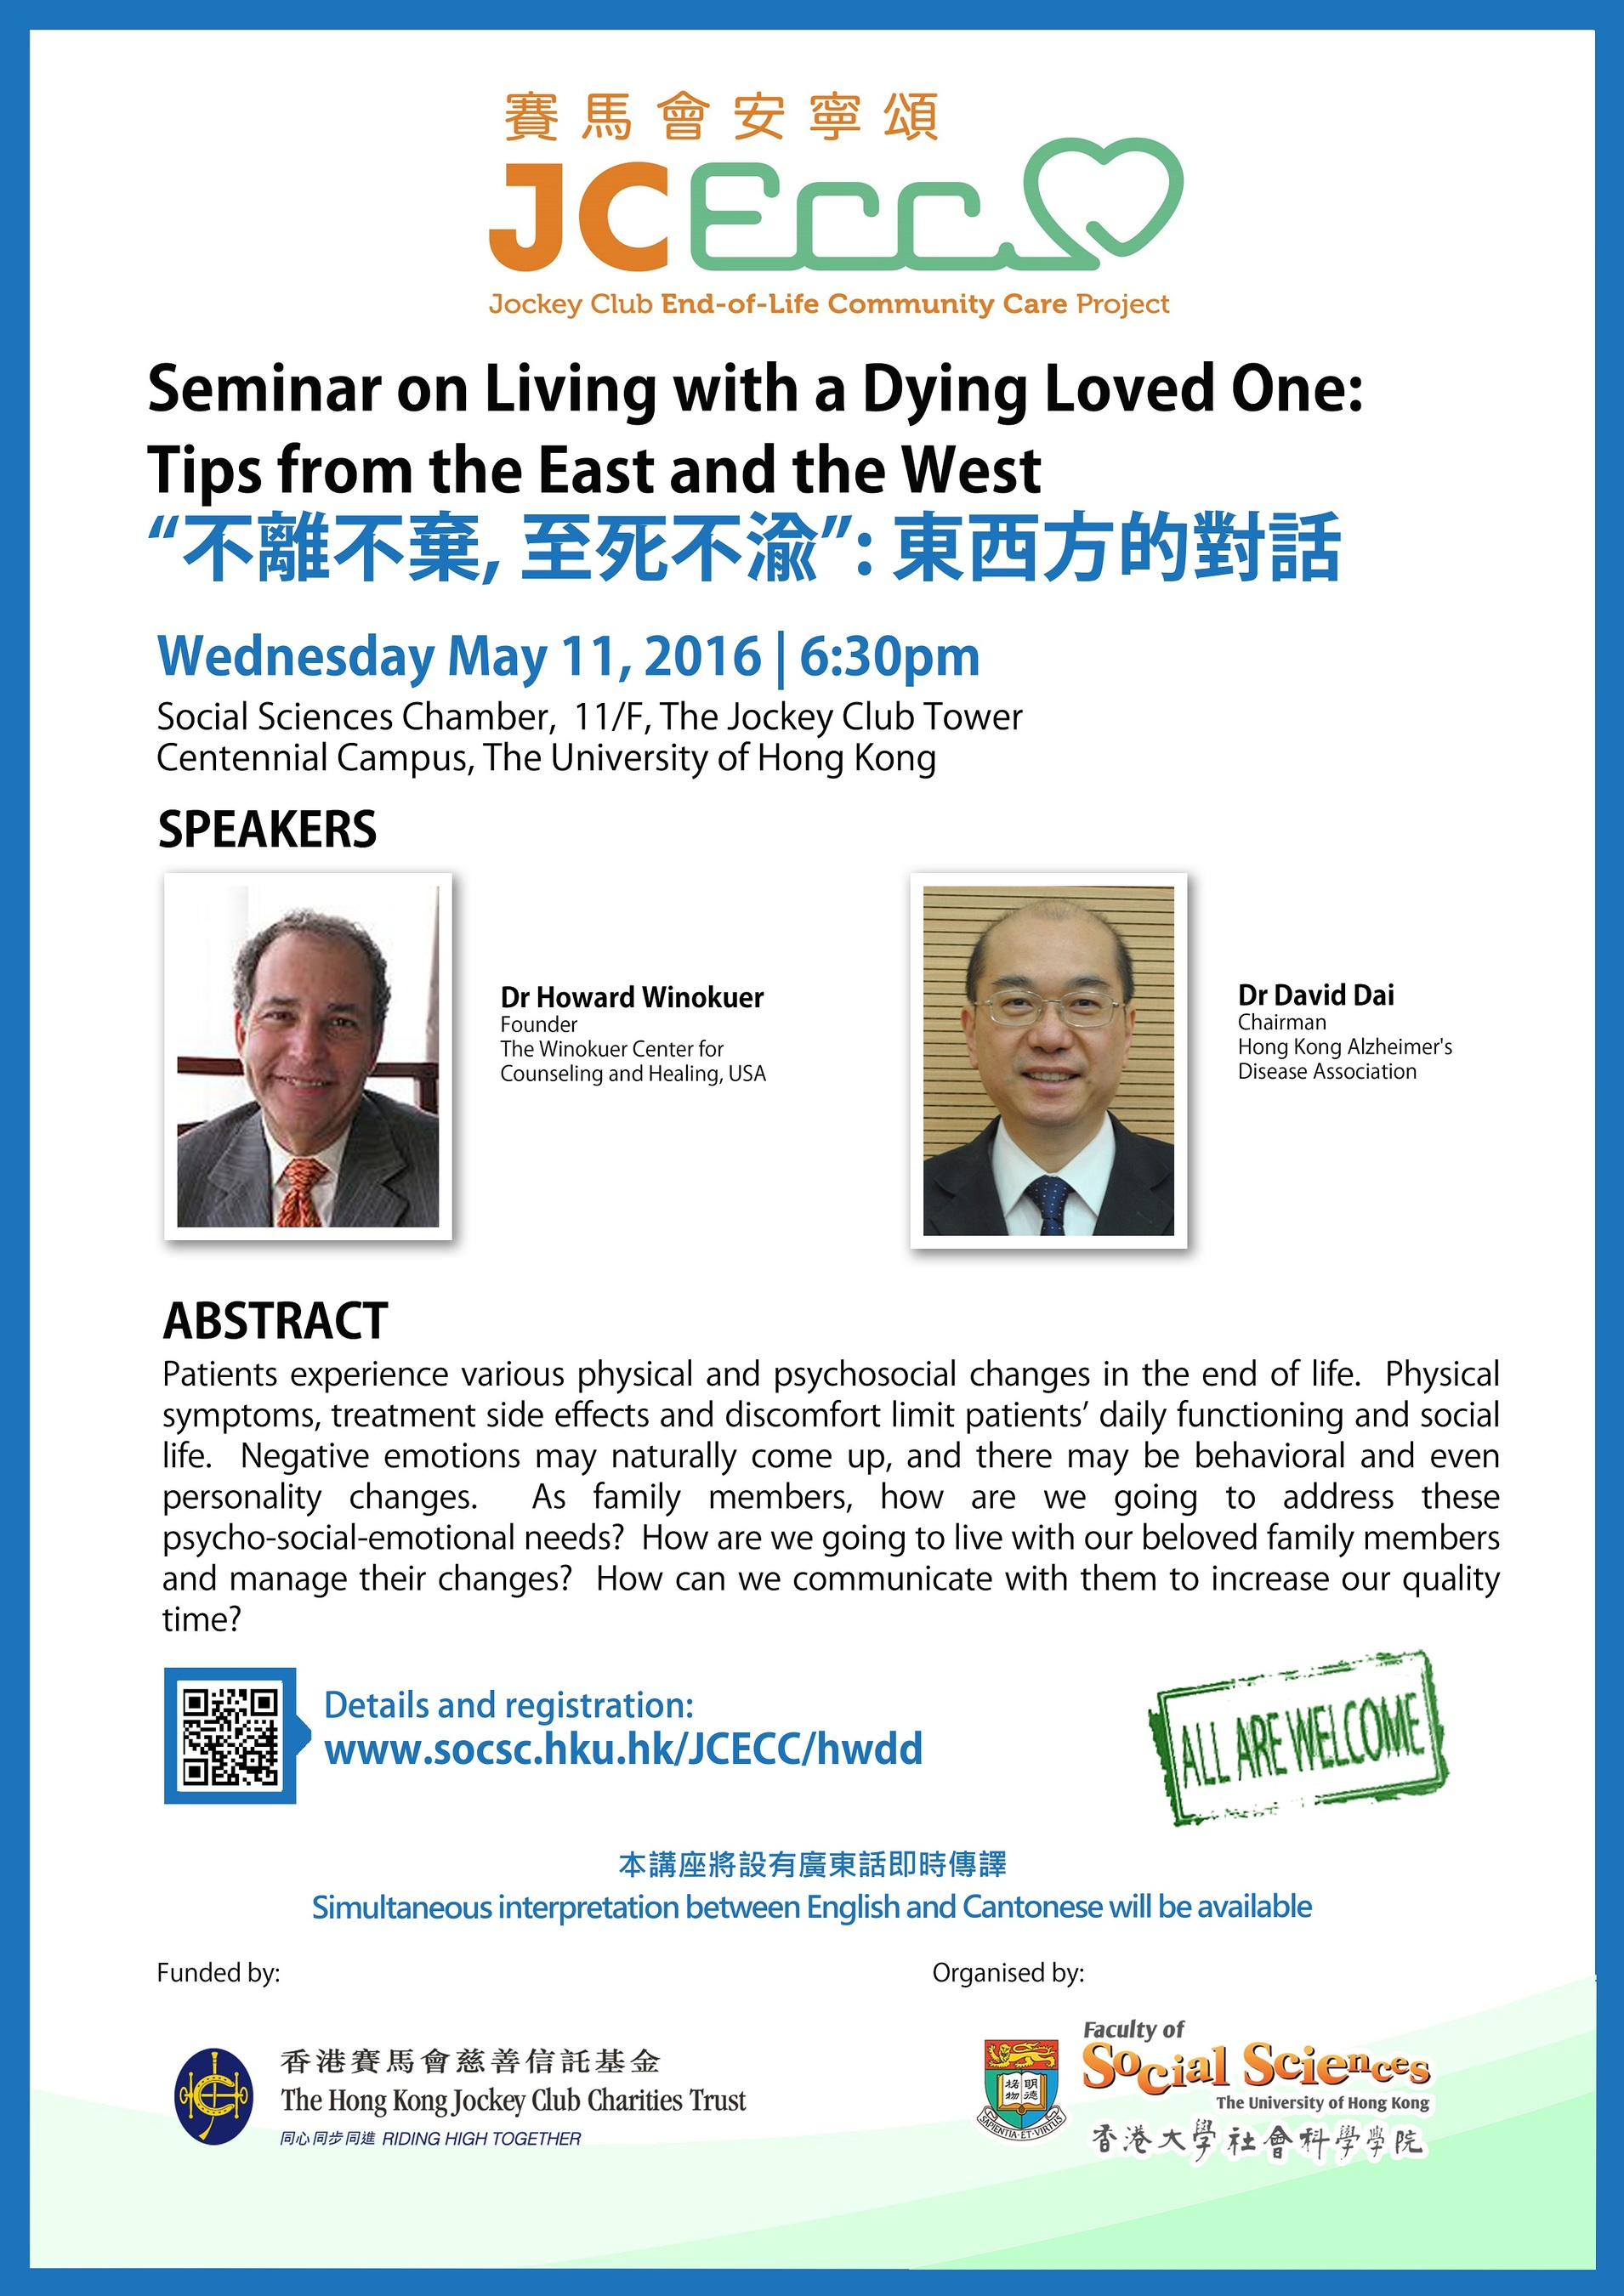 Seminar on Living with a Dying Loved One: Tips from the East and the West